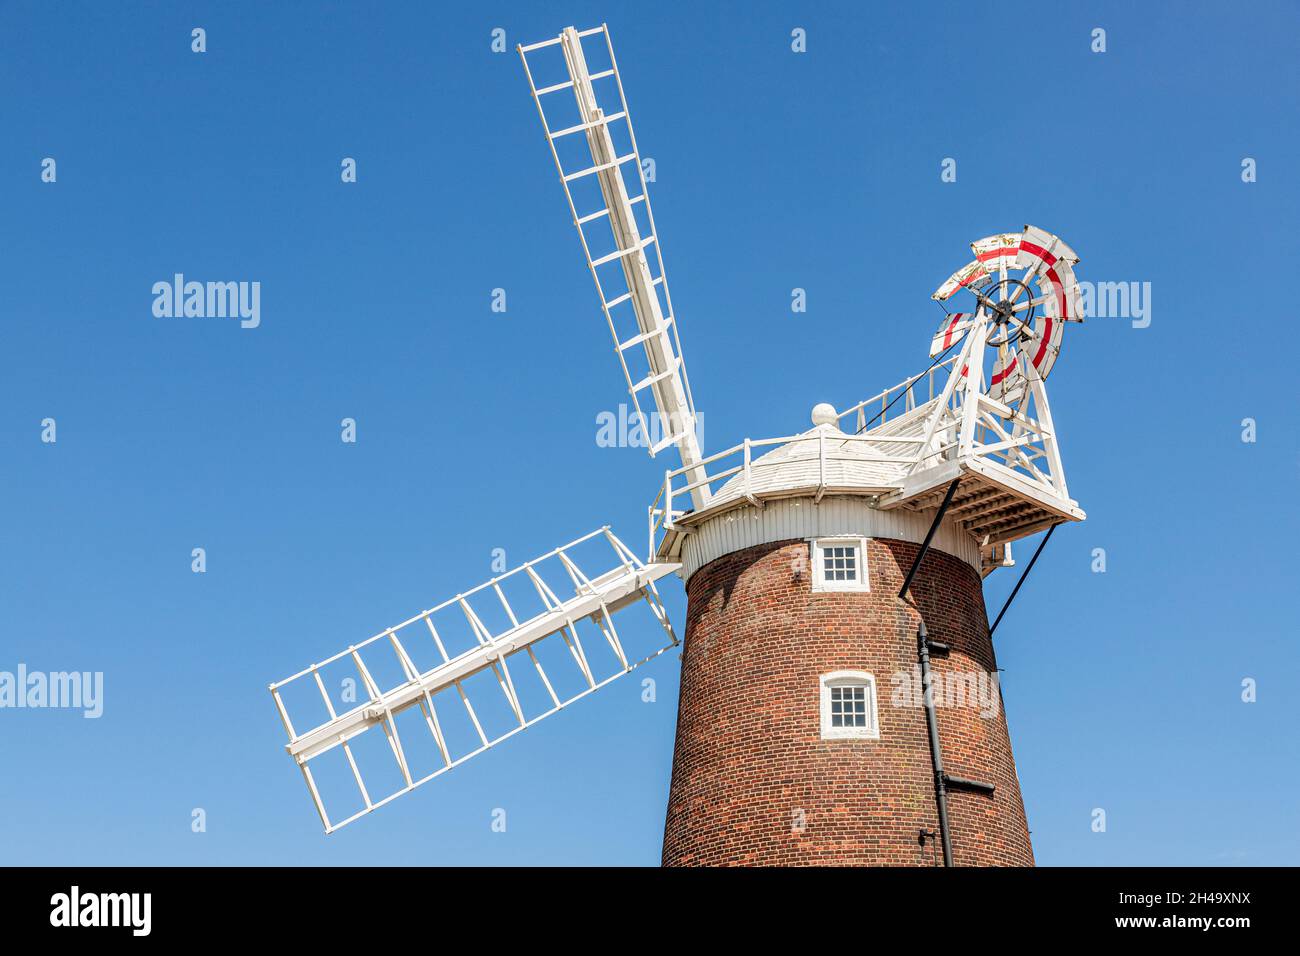 The early 19th century Cley Windmill in the village of Cley next the Sea, Norfolk UK Stock Photo